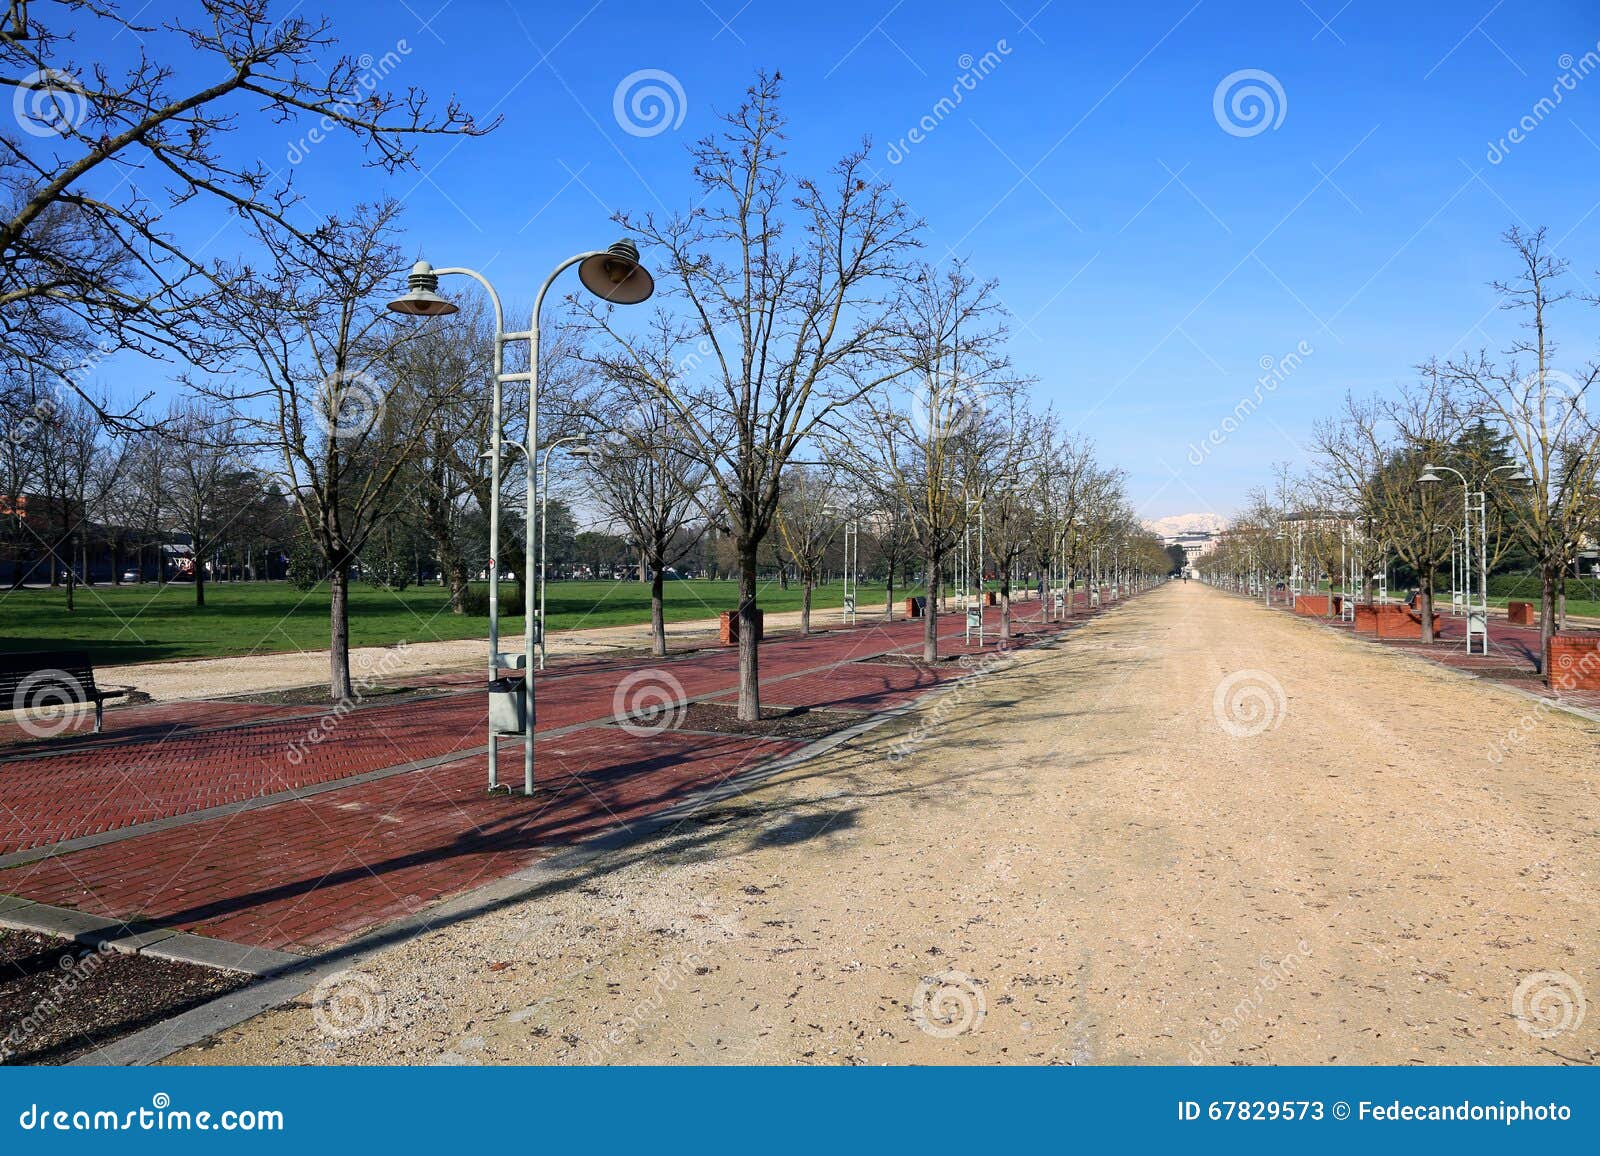 avenue in the public park called campo marzo in vicenza, italy